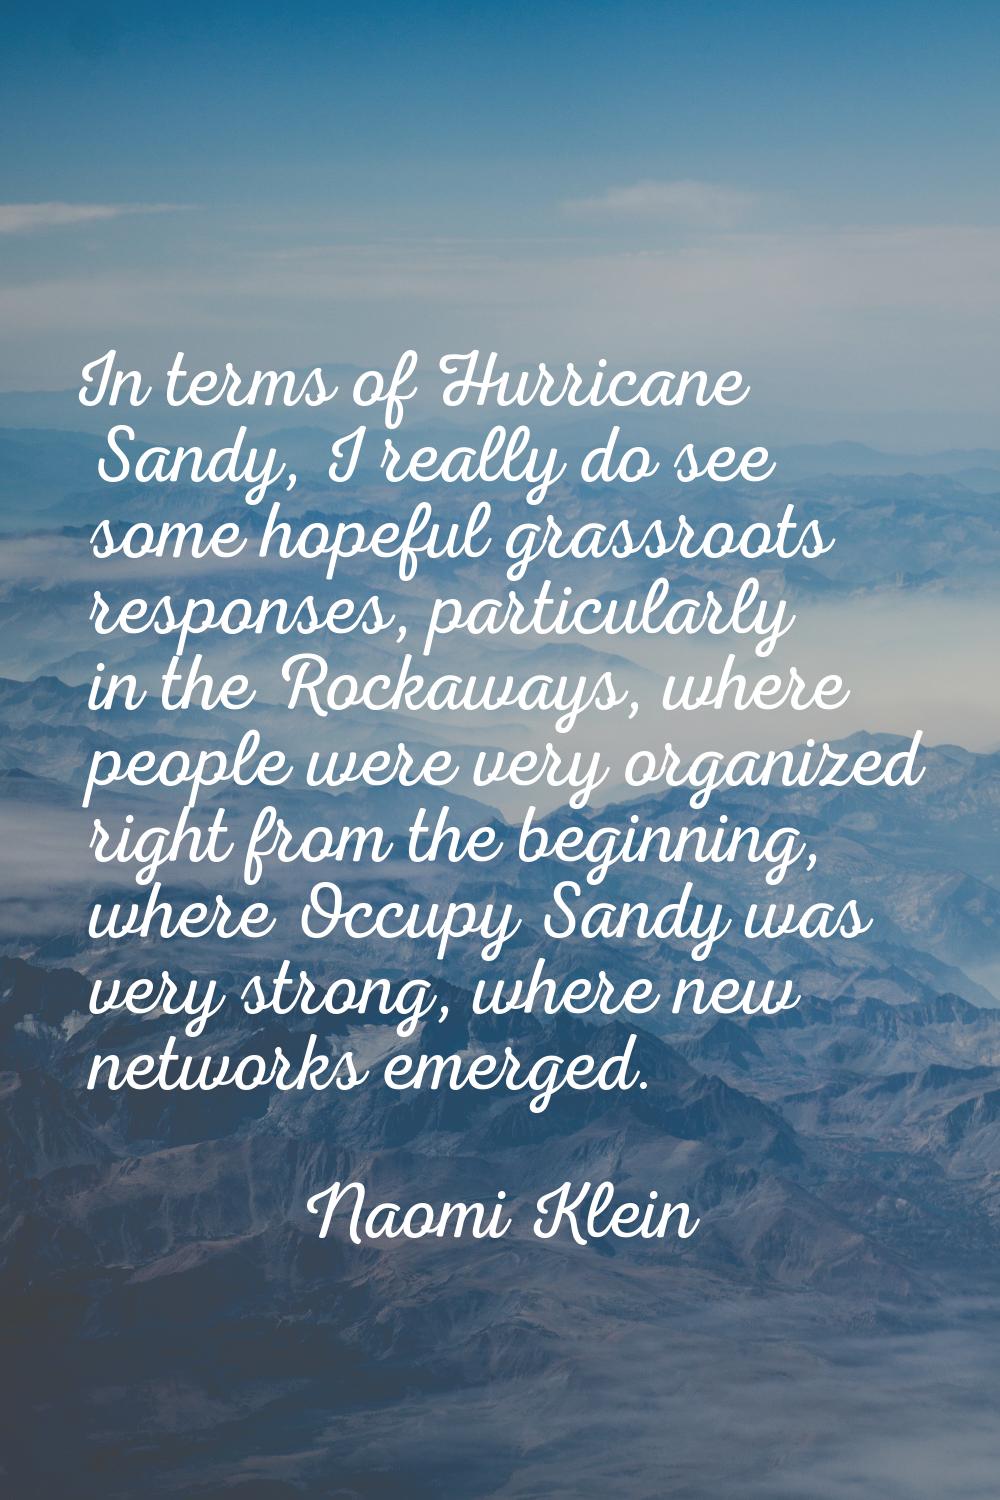 In terms of Hurricane Sandy, I really do see some hopeful grassroots responses, particularly in the